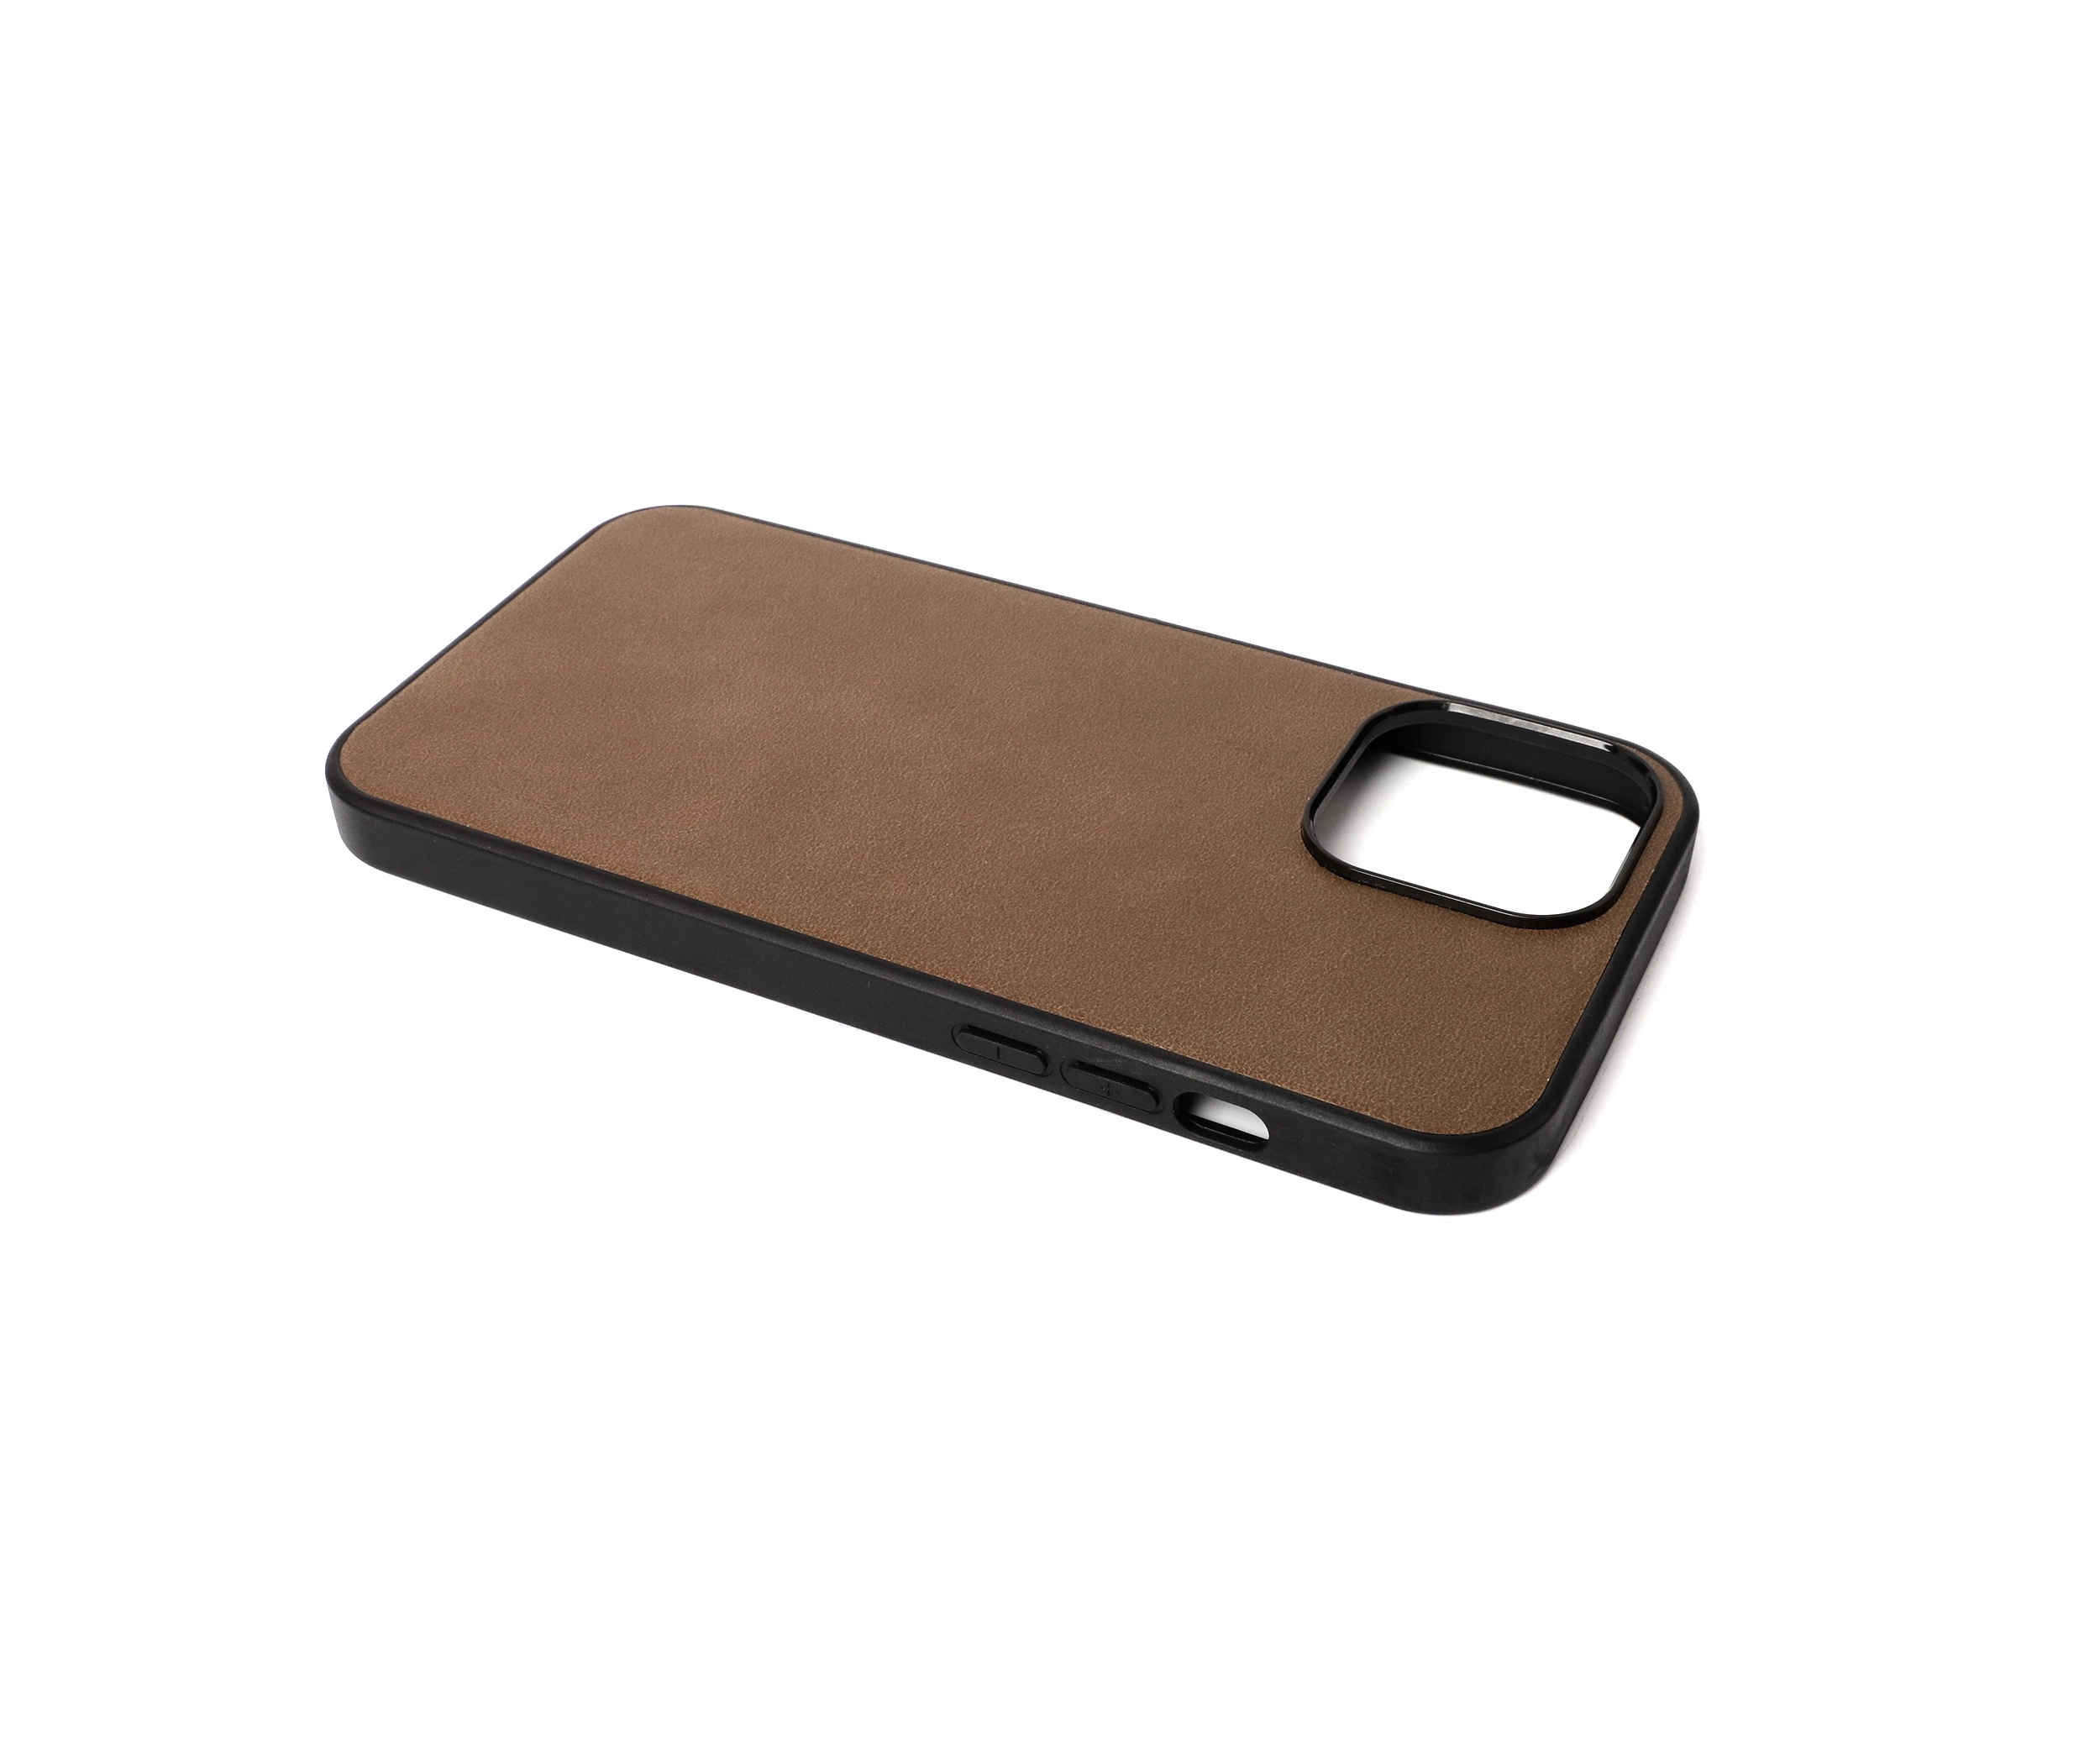 Leather iPhone Case Benefits